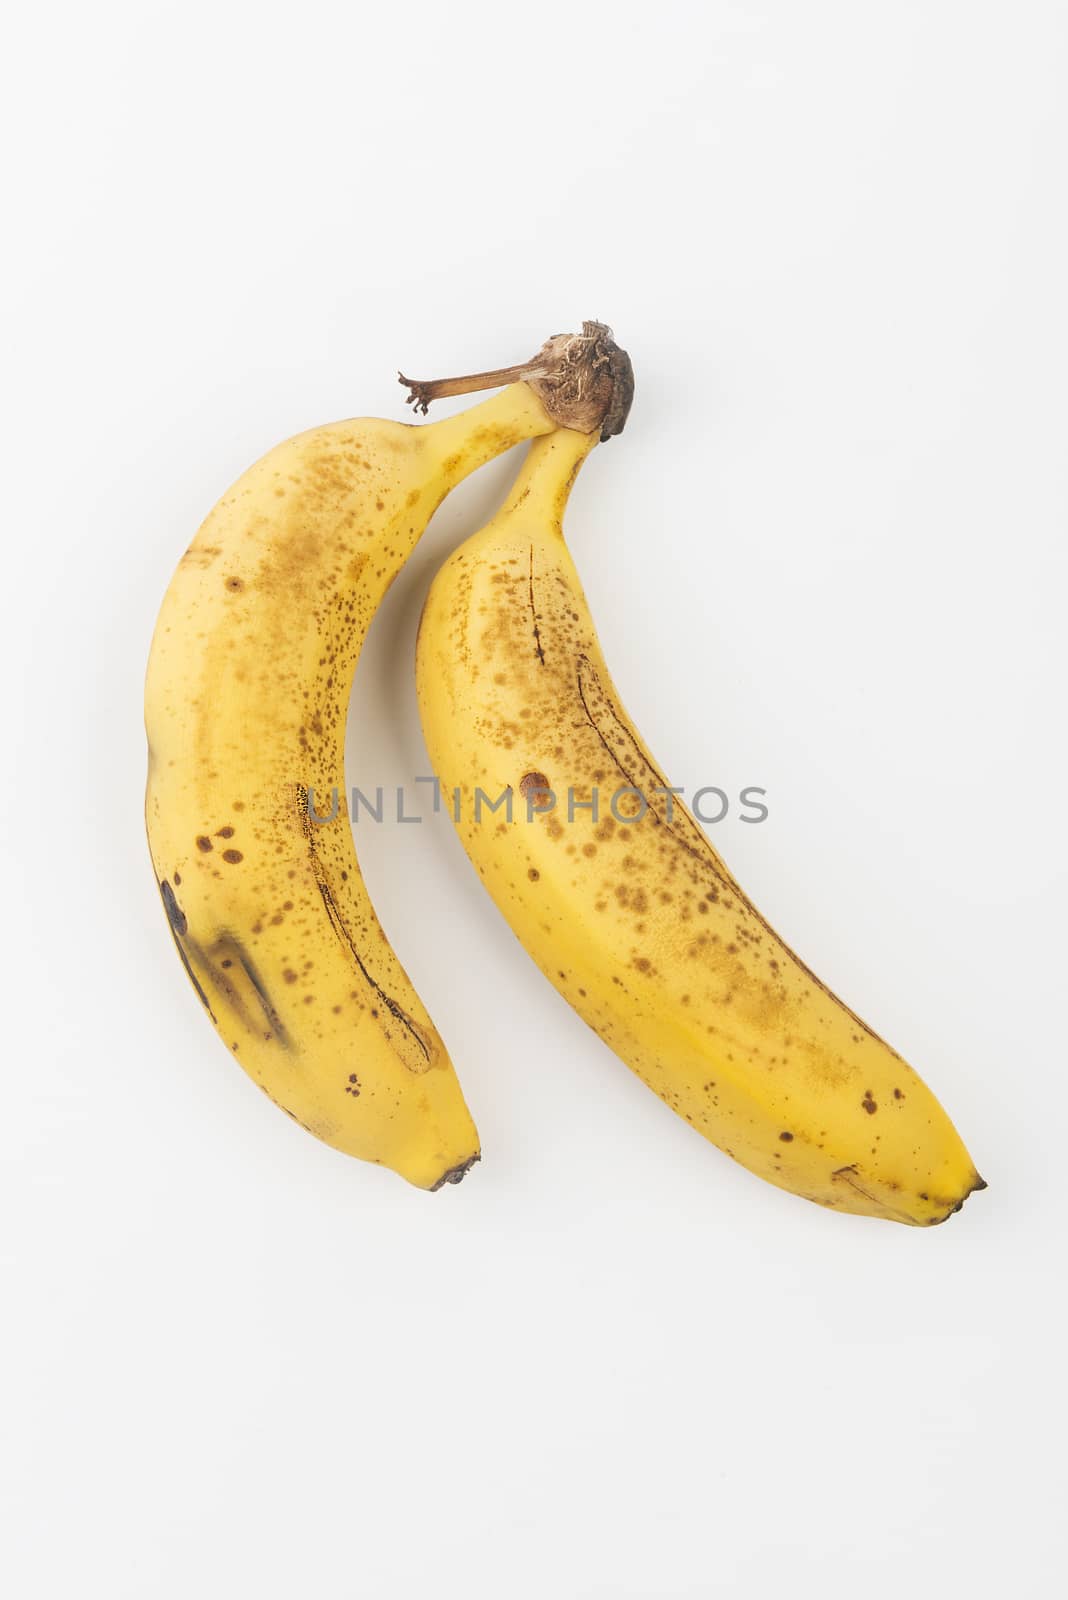 two bananas on a white table